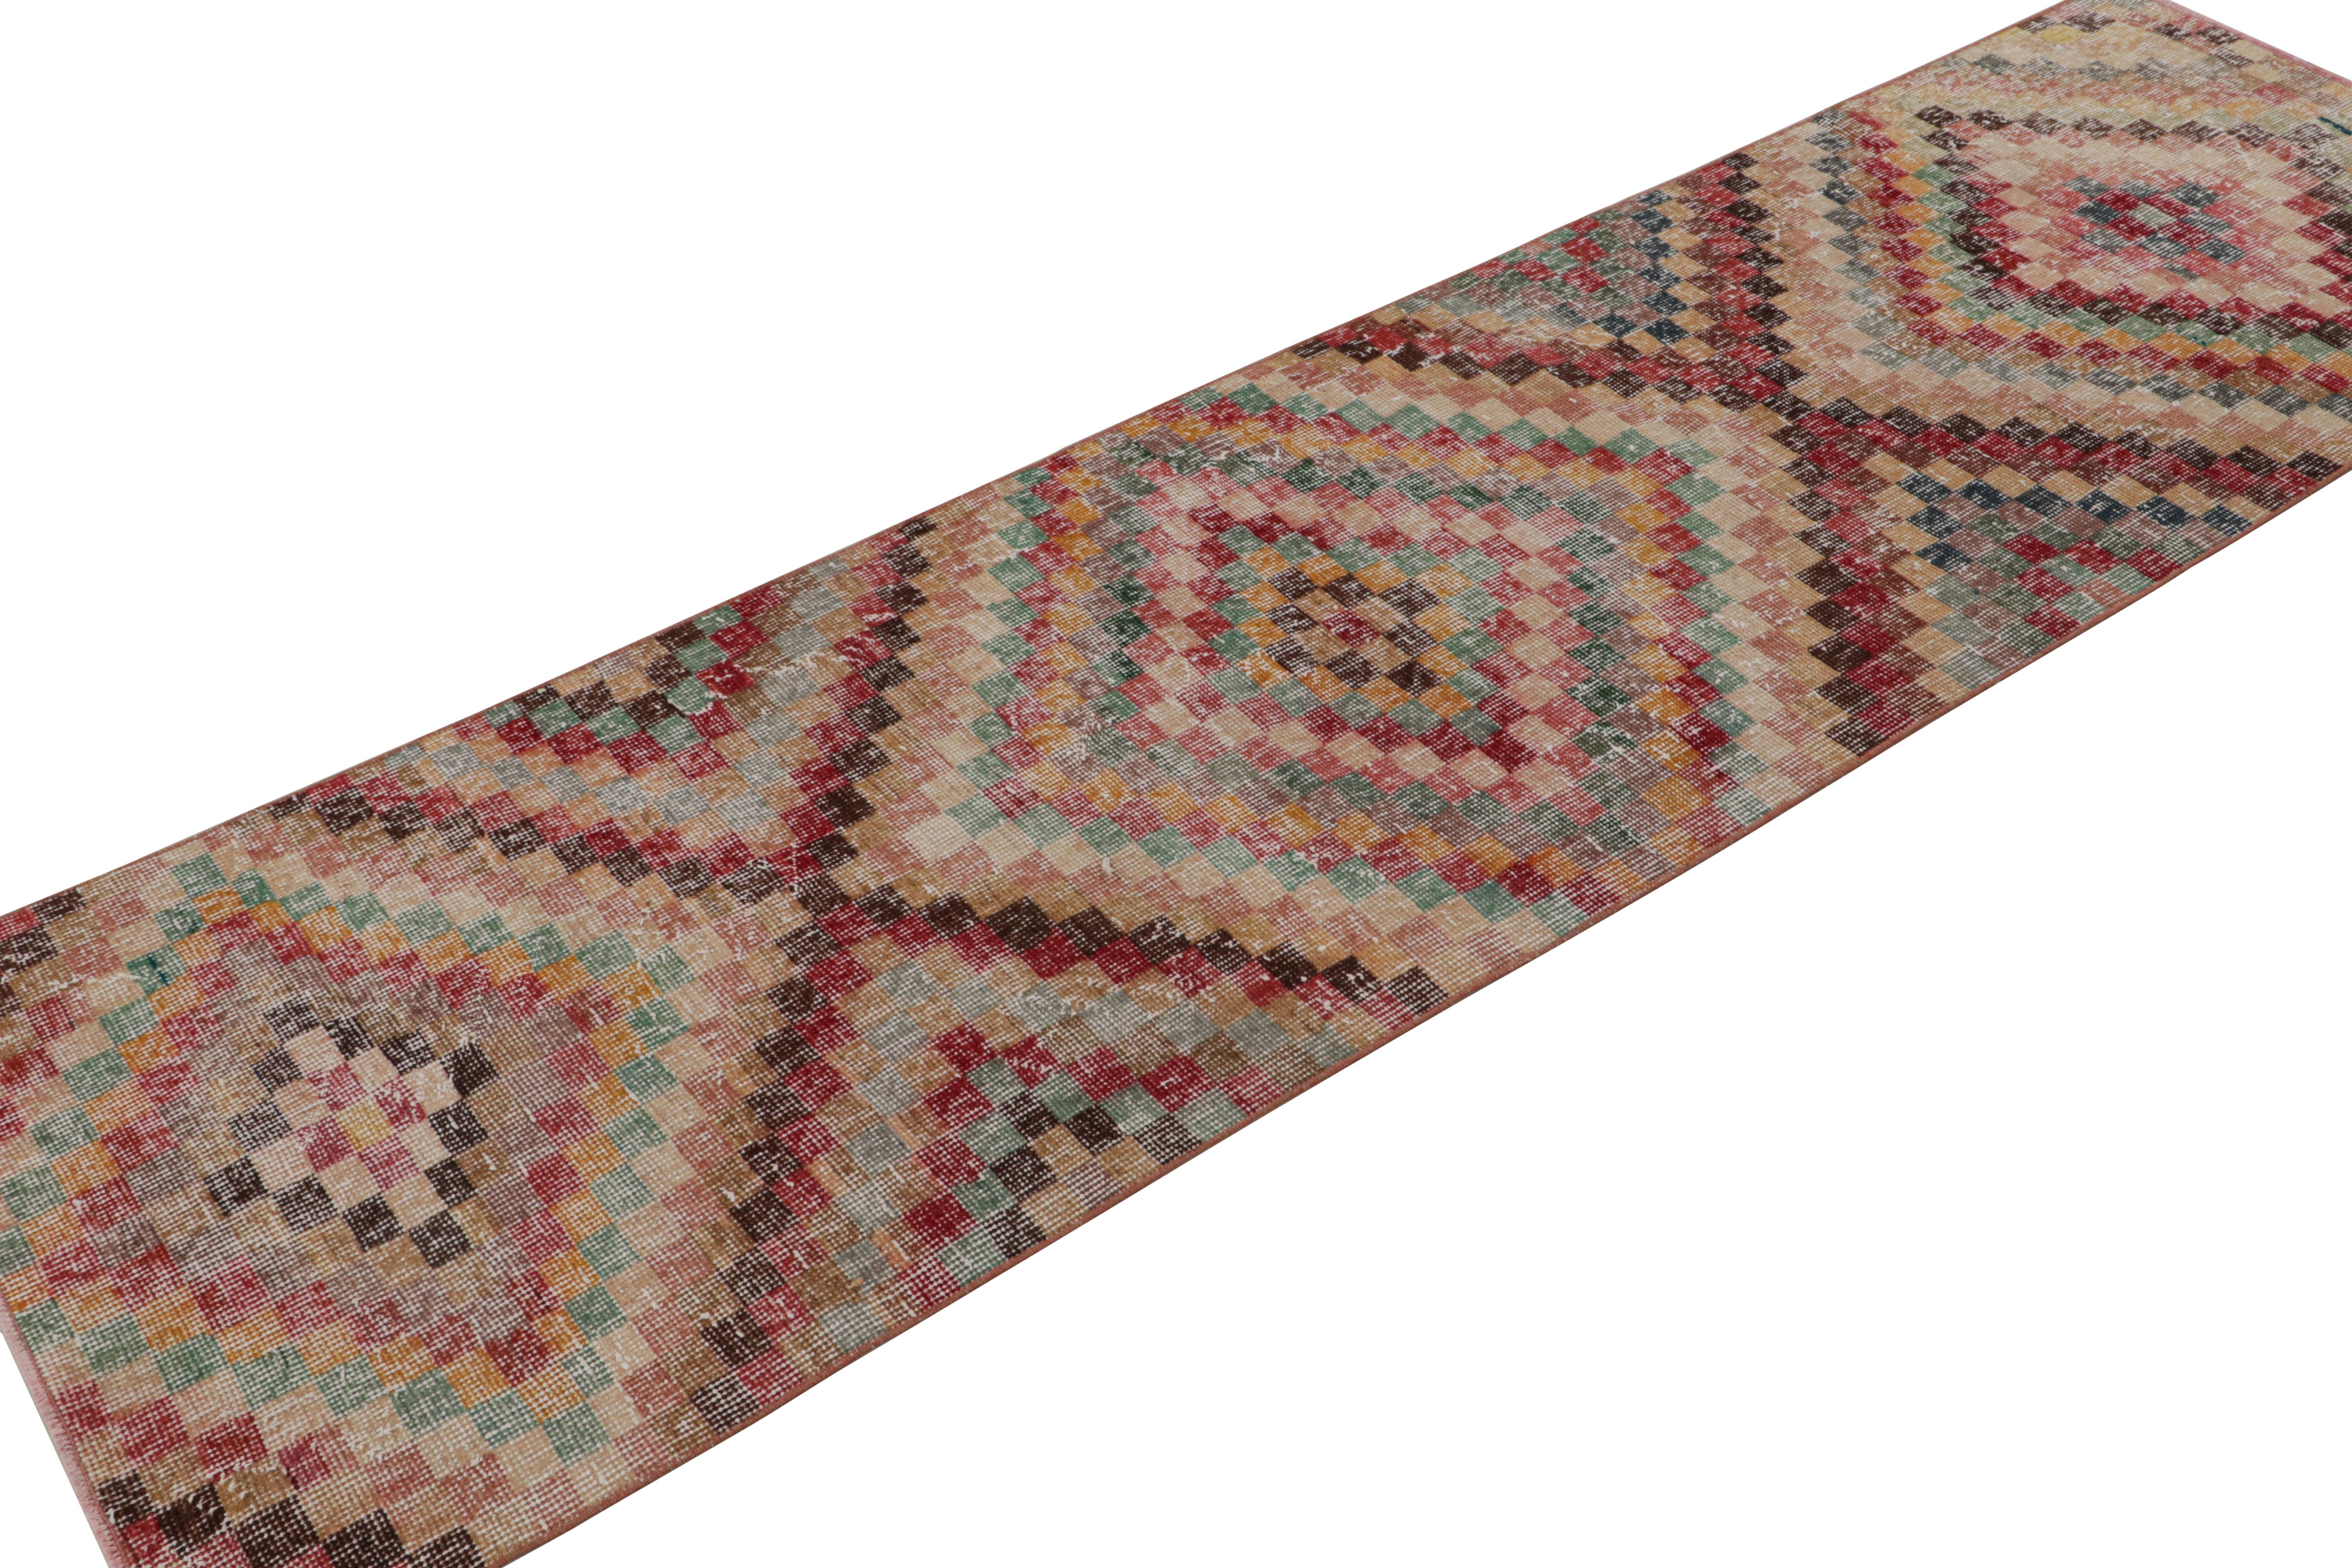 Handknotted in wool, this 2x8 vintage runner originates from Turkey, circa 1960-1970, and is believed to be among the works of mid-century designer Zeki Múren. 

On the Design:

Connoisseurs will admire this vintage Zeki Múren’s design which